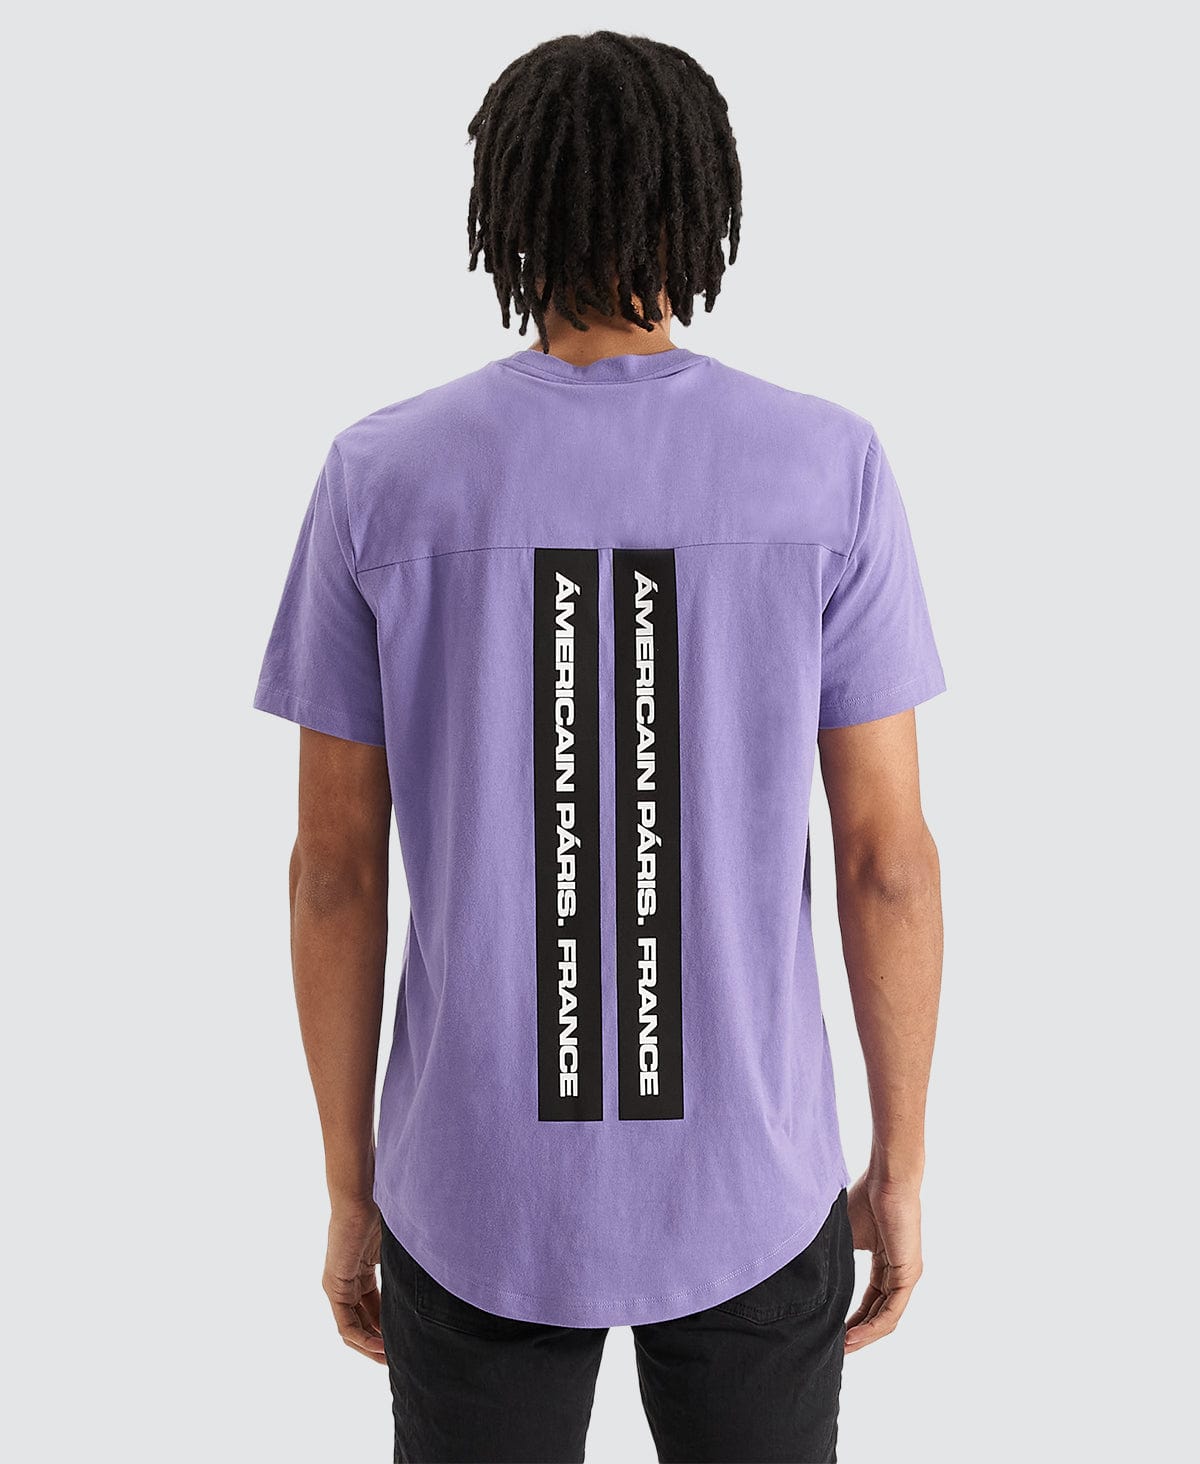 T-Shirt Americain Dual – Curved in Hem | Store Royale Neverland Purple